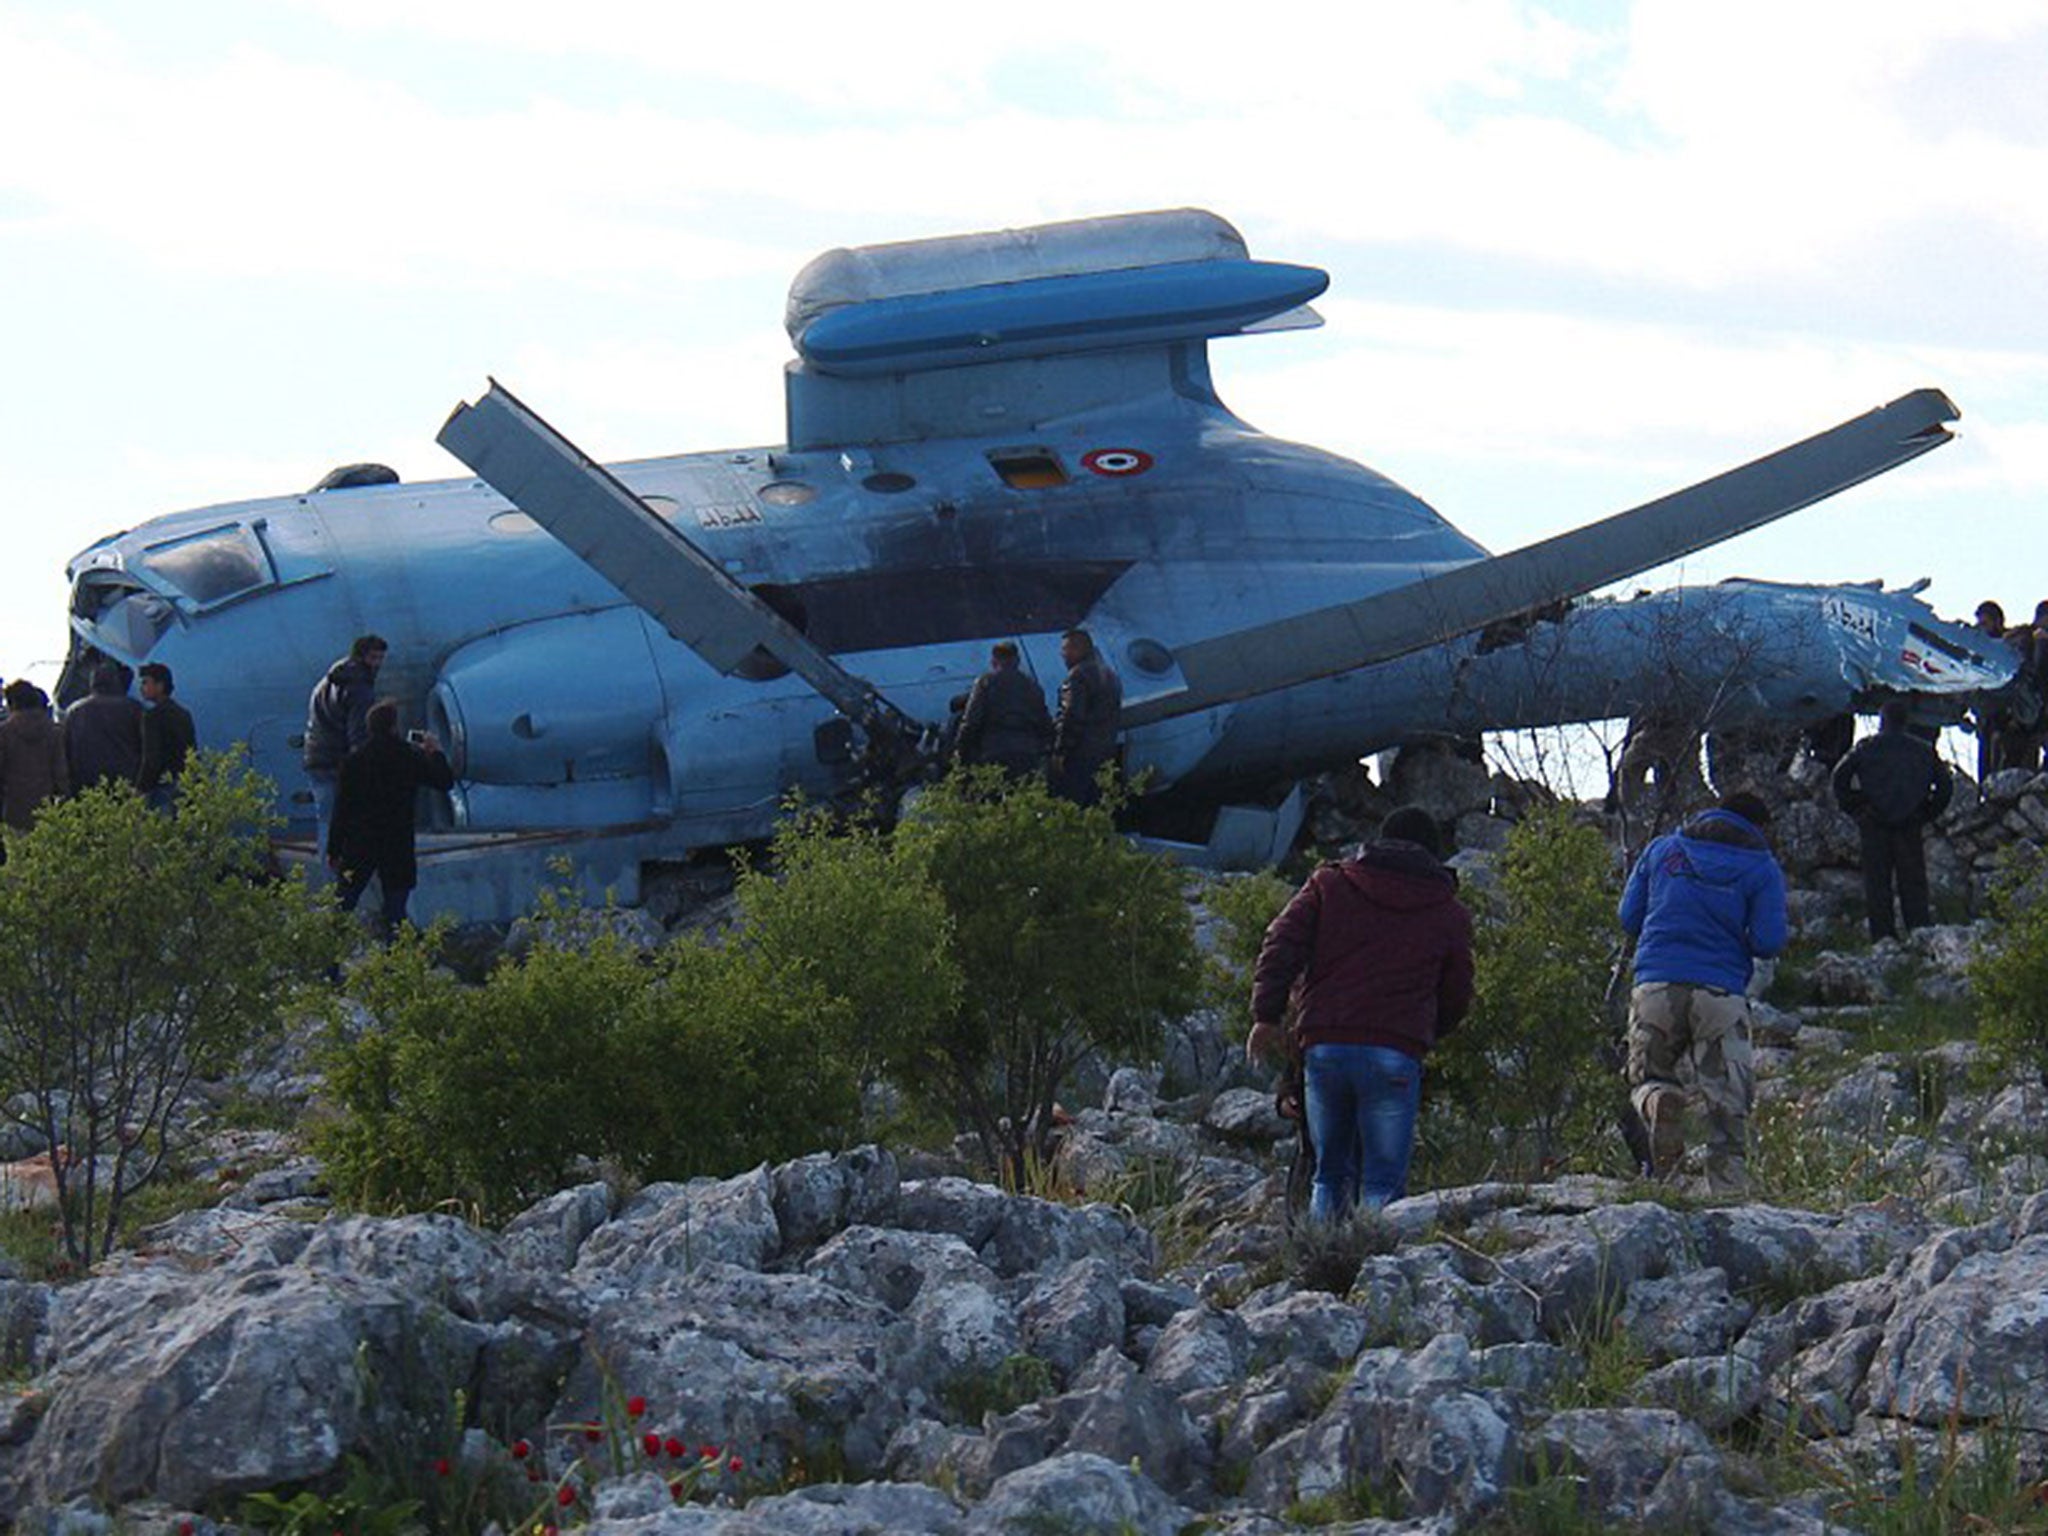 Rebels and locals flocked to see the wreckage of the downed plane (AFP/Getty)